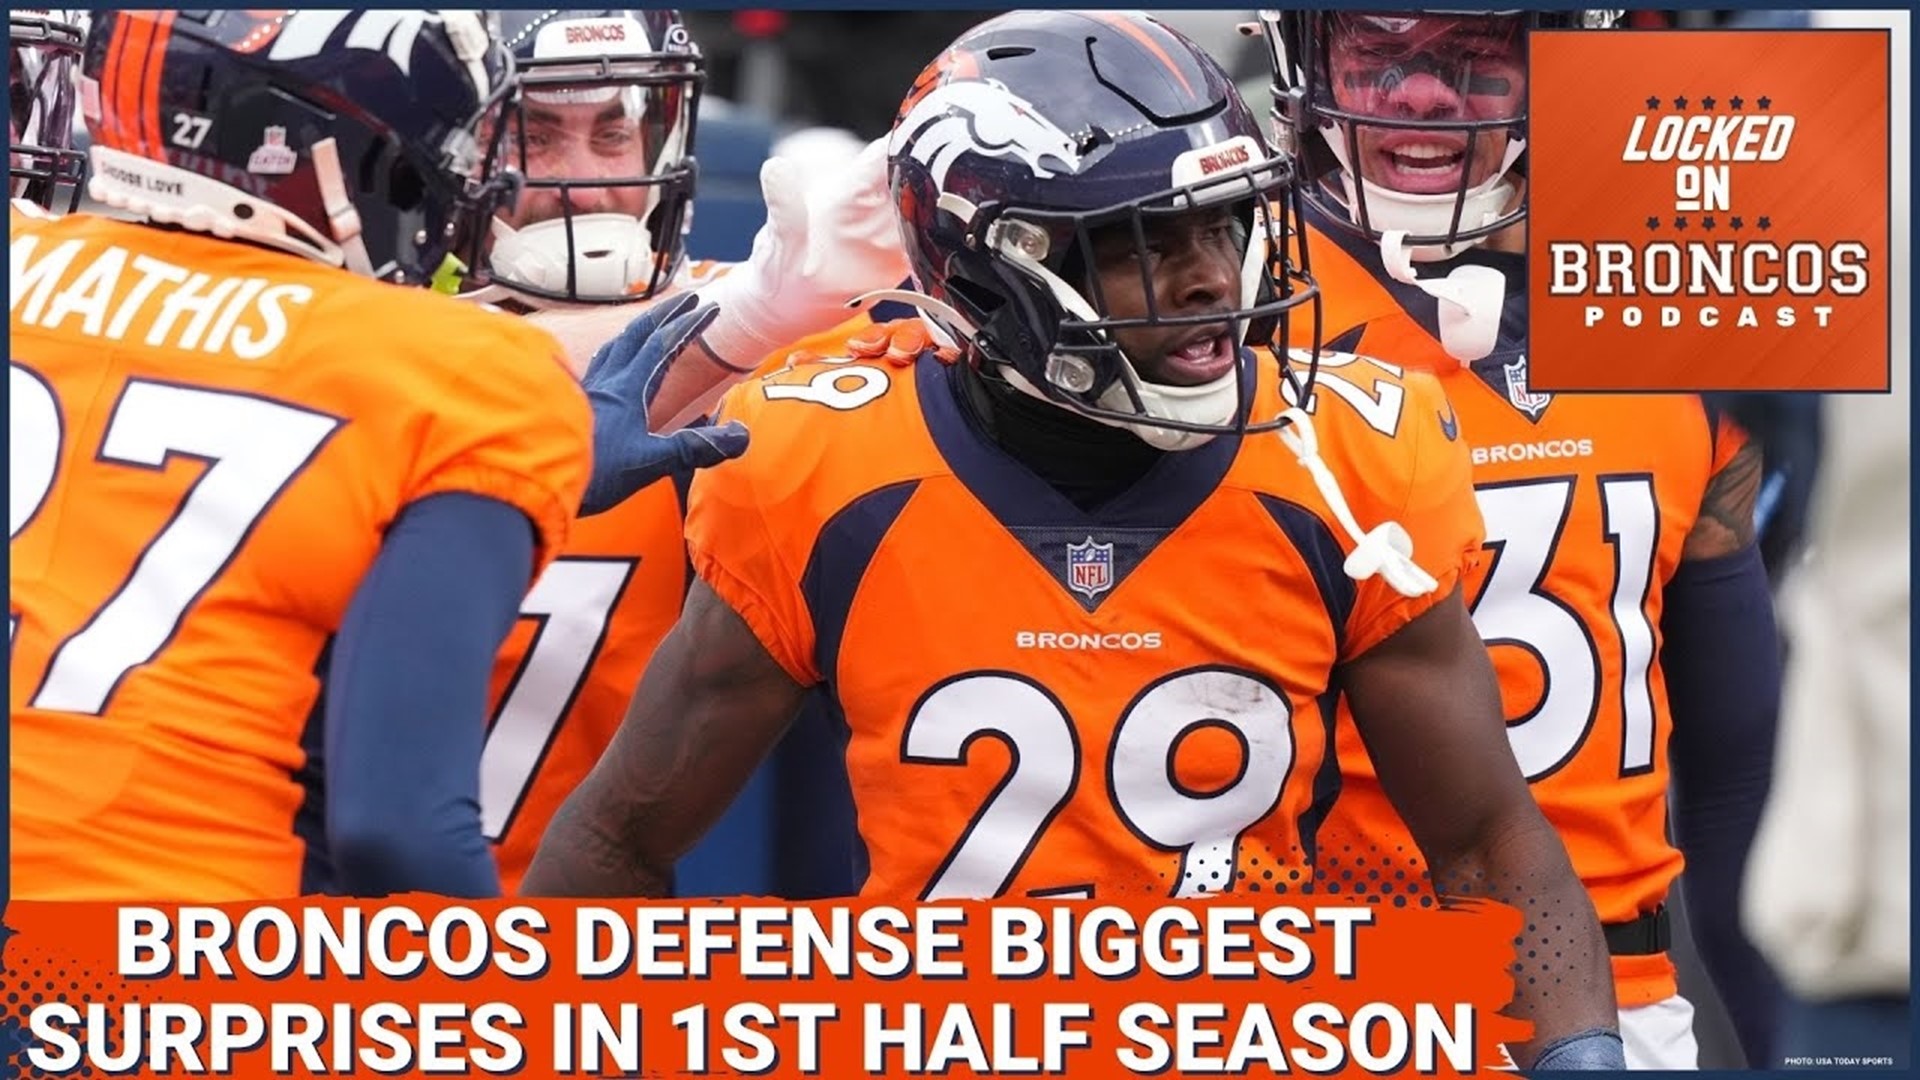 After the first half of the season, what were the biggest surprises and disappointments for the Denver Broncos defense?